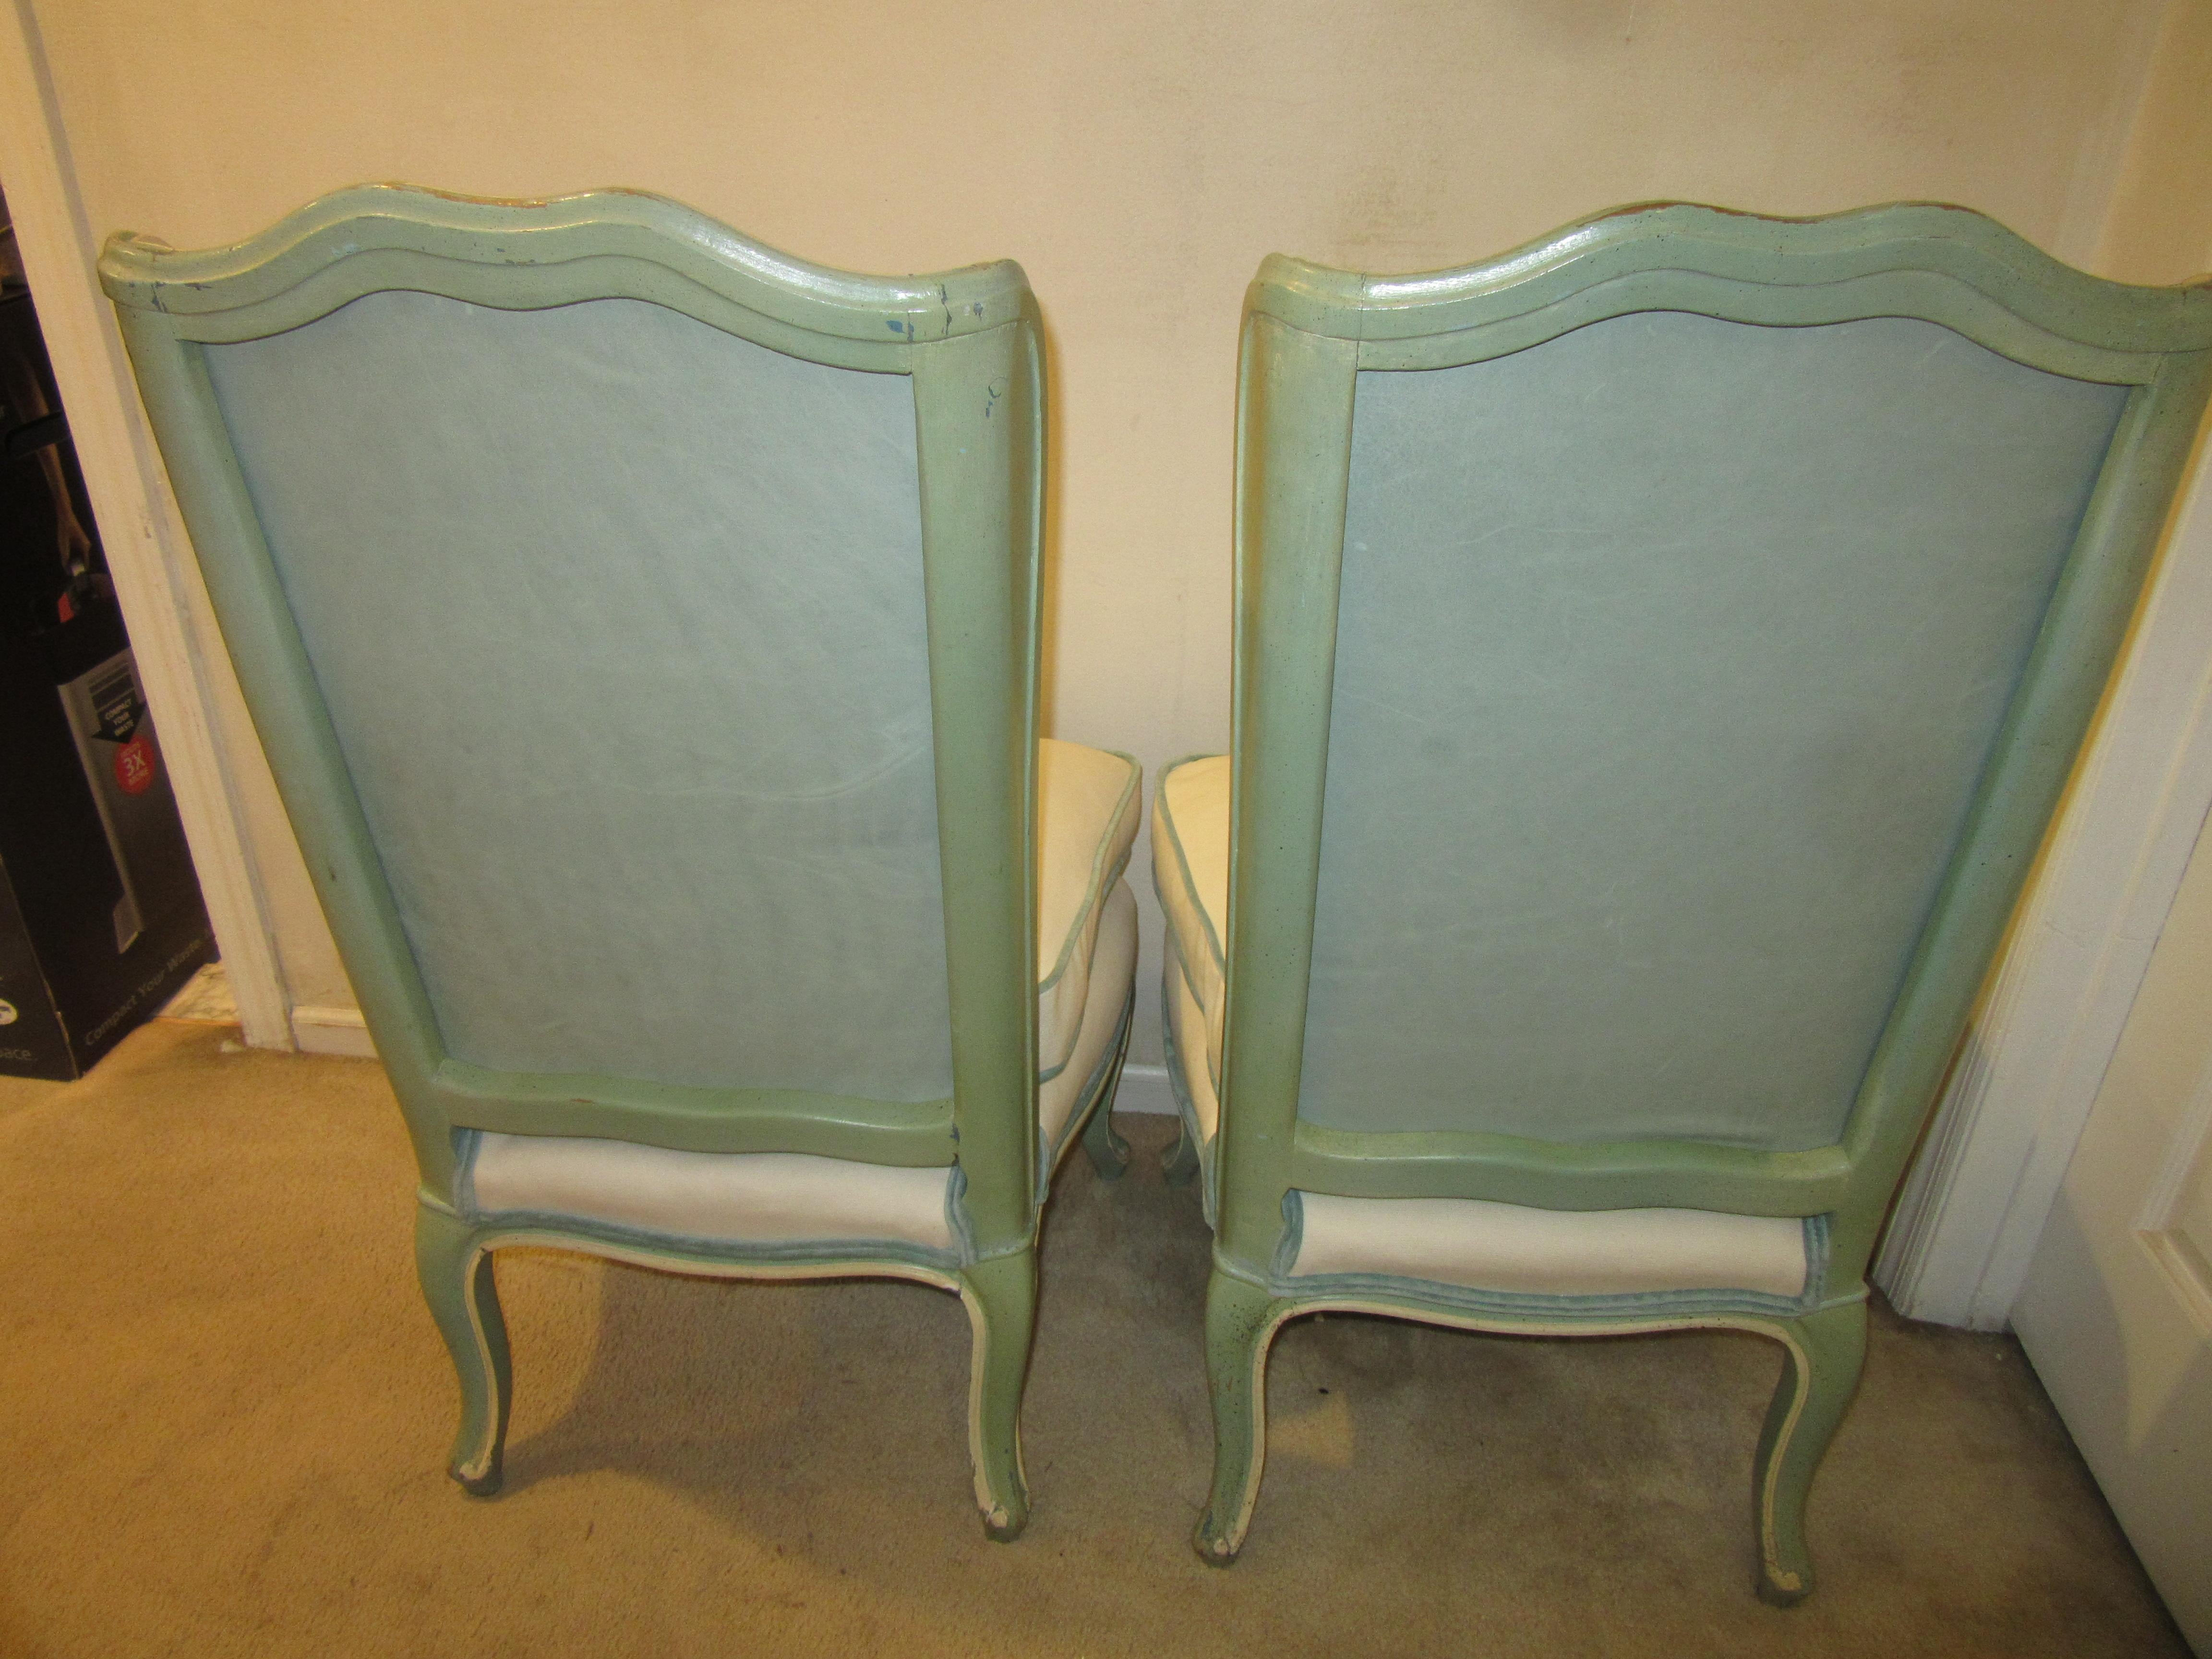 Mid-20th Century Hollywood Regency Blue Slipper Chairs with White Chenille Upholstery and Leather